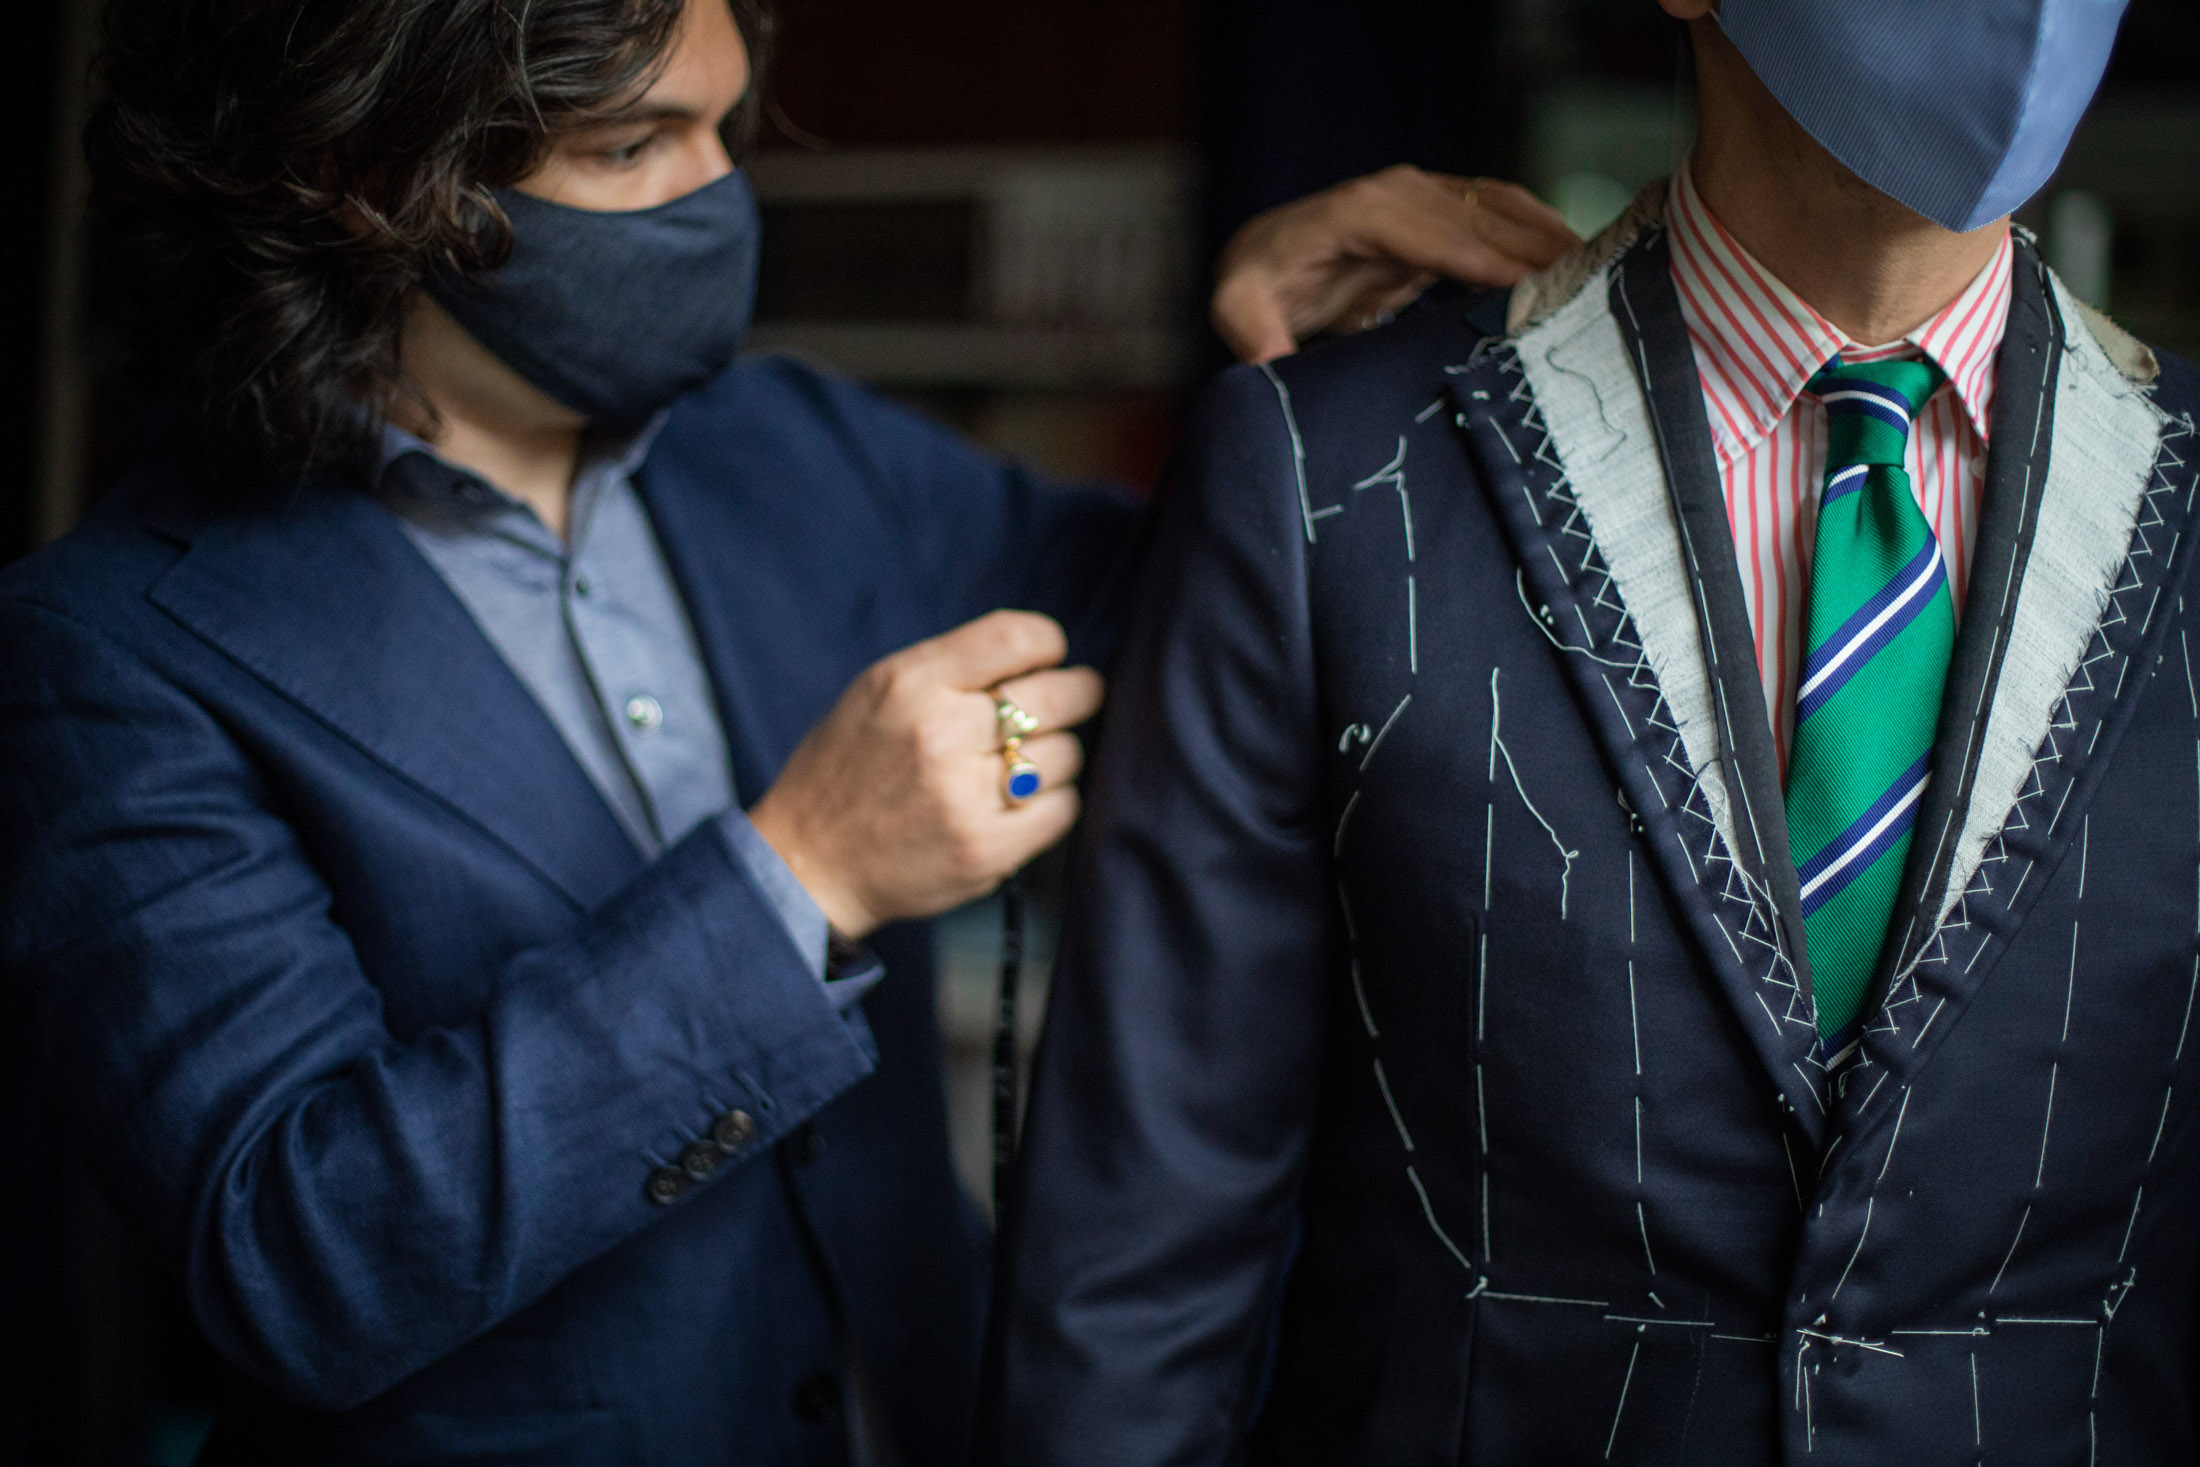 The pinstripe suit used to be all about power. It's time to reclaim it, Men's suits